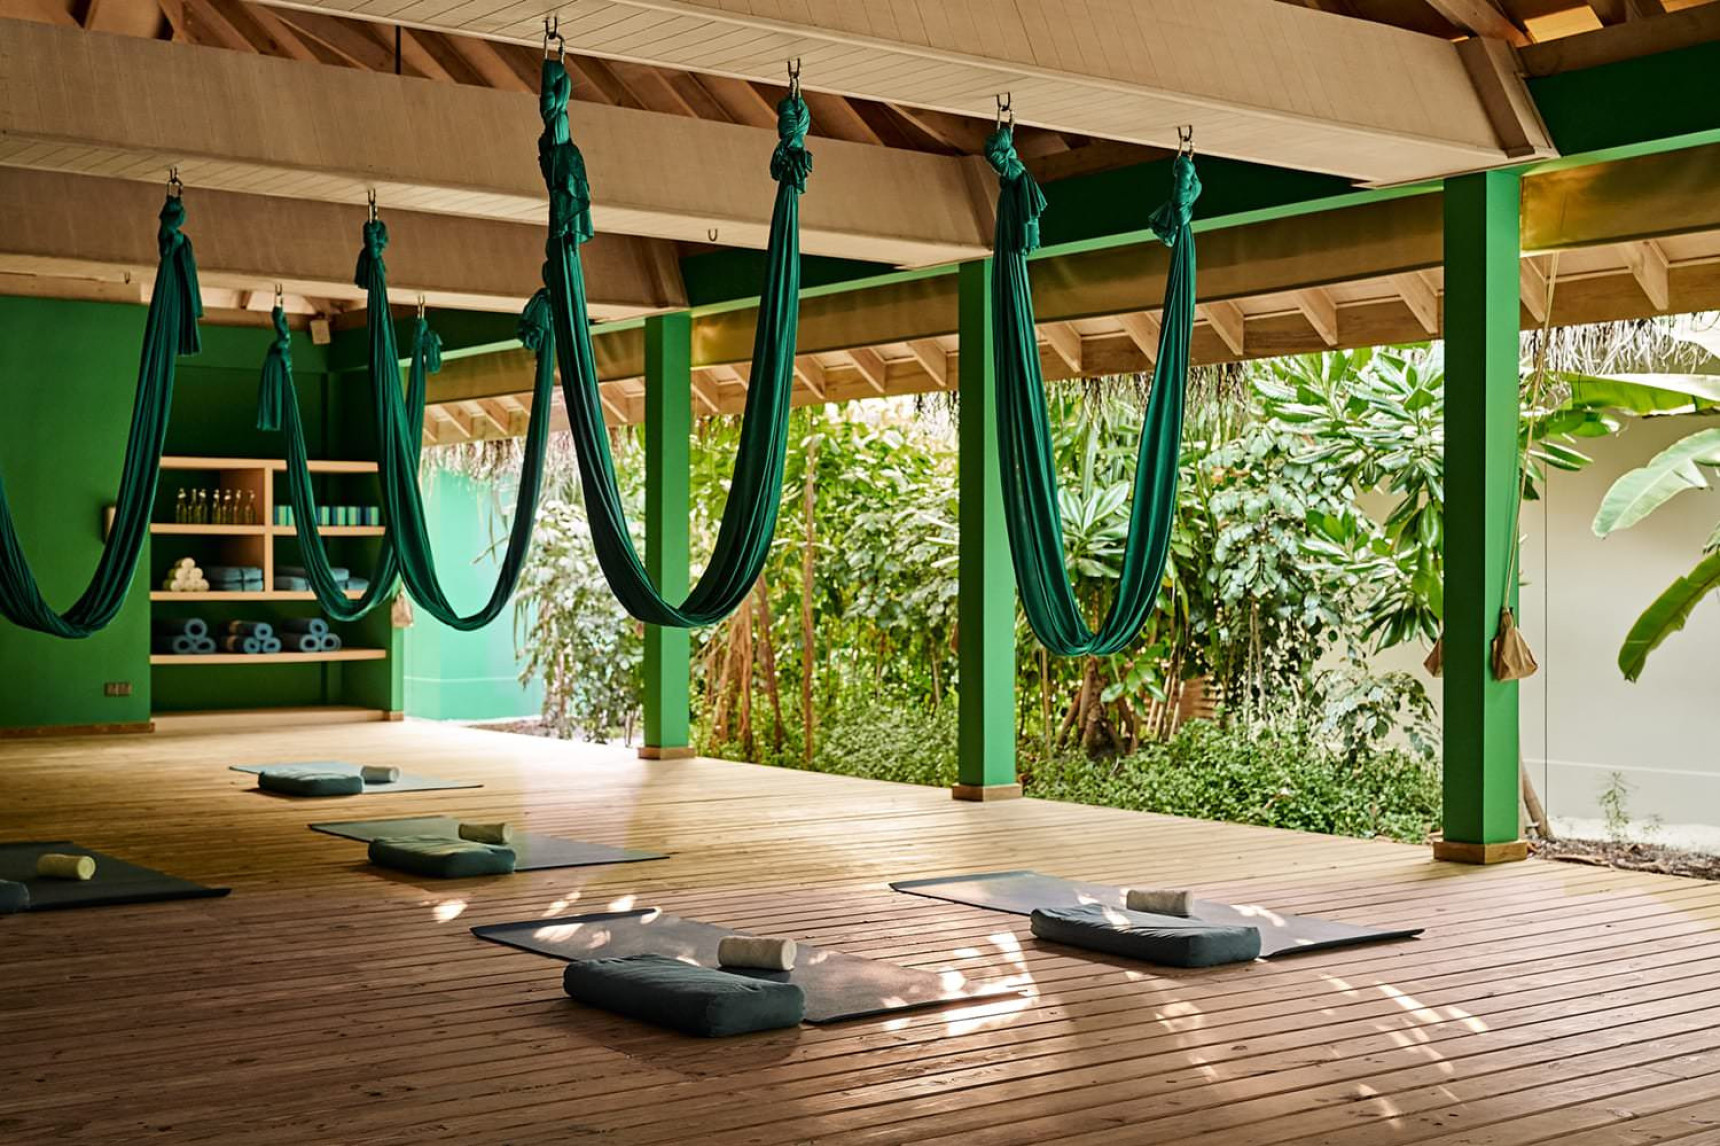 The Maldives edition – an intimate Q&A with Finolhu’s GM Marc reader yoga relax wellbeing